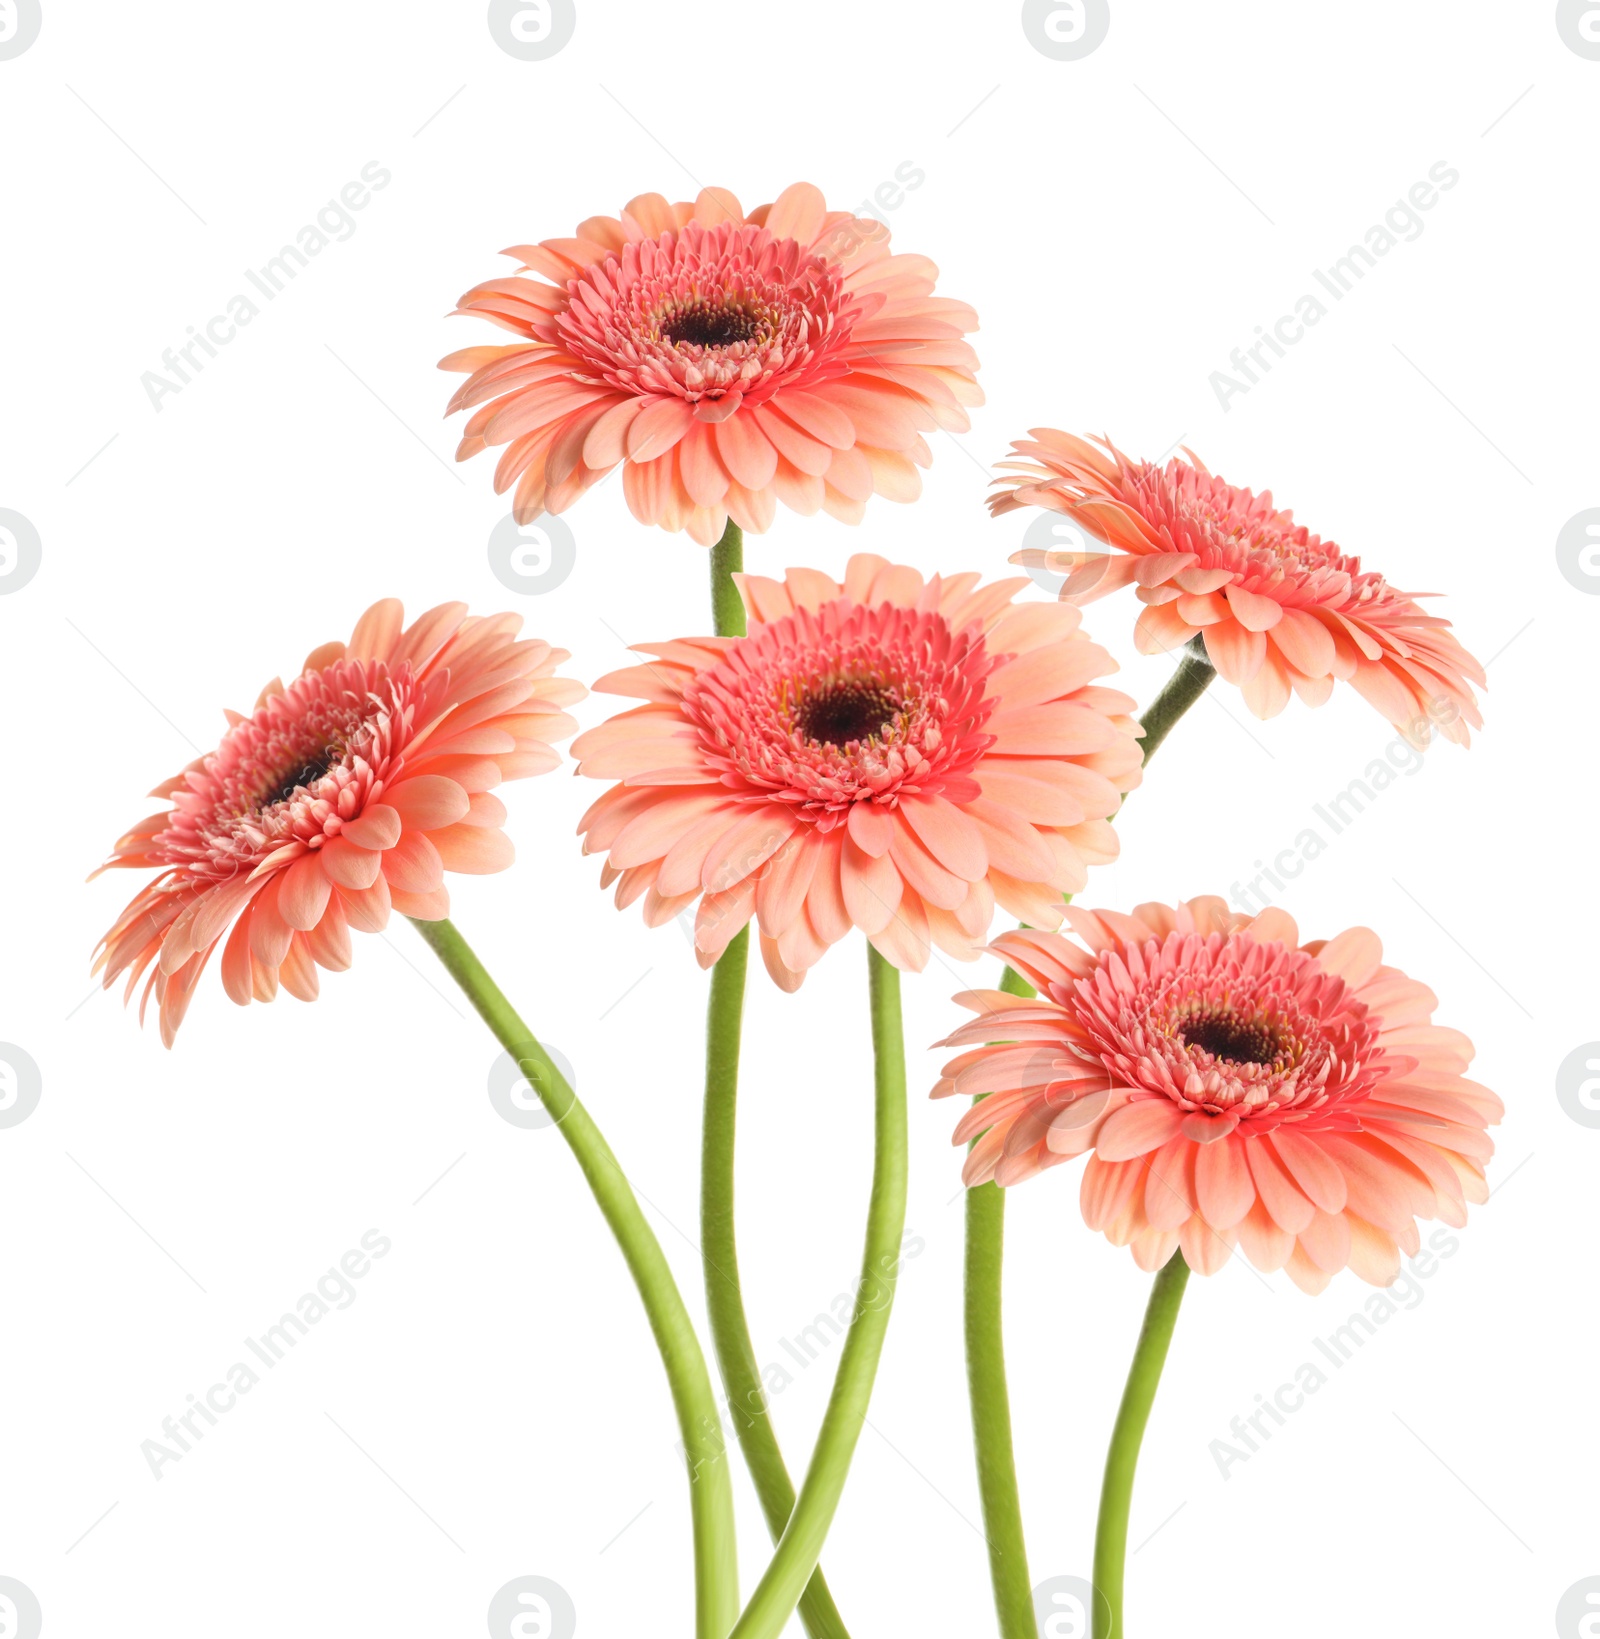 Image of Many beautiful pink gerbera flowers isolated on white